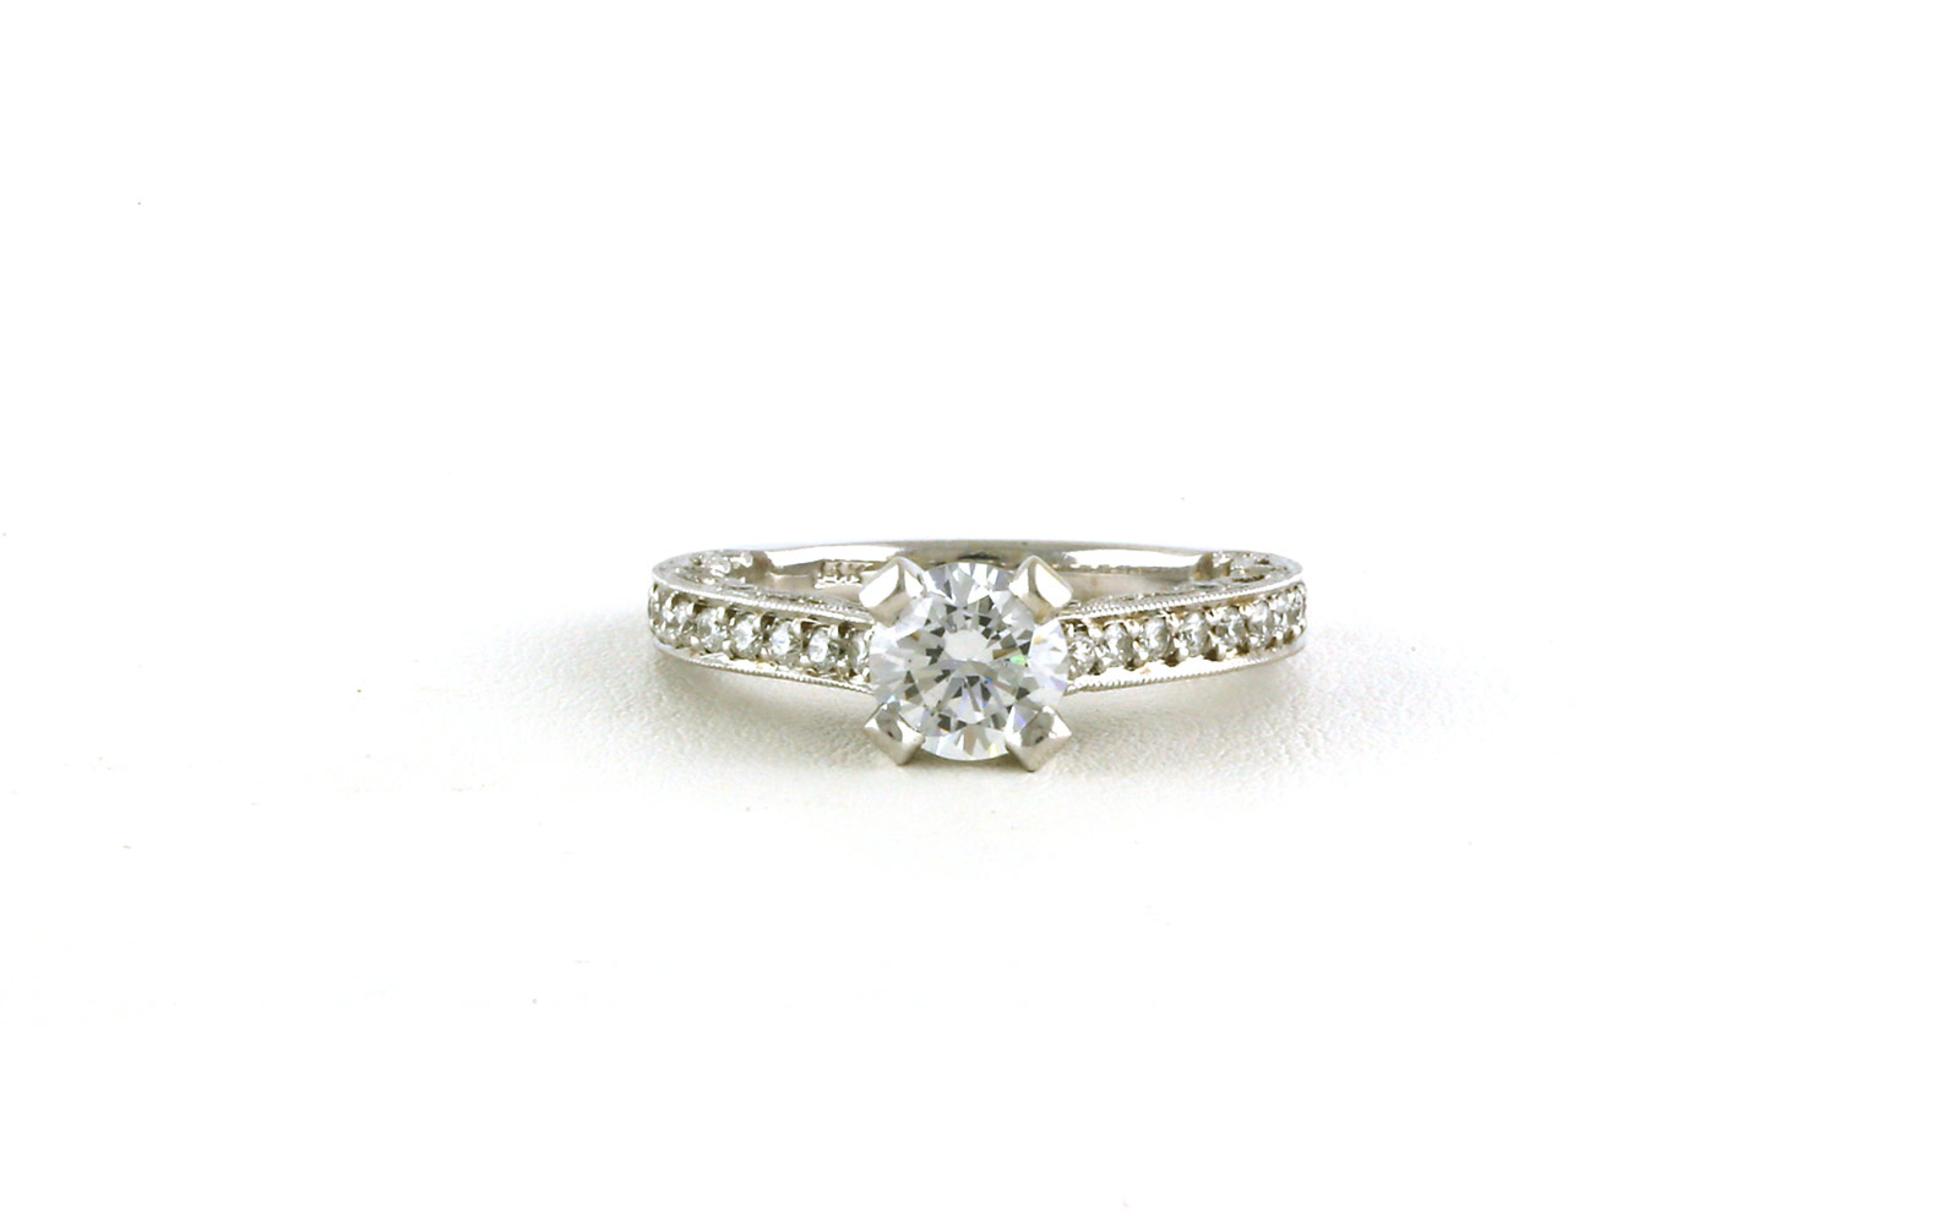 4-Prong Filigree-style Engagement Ring Mounting with Peek-a-boo Diamond and Pave Band in White Gold (0.55cts TWT)